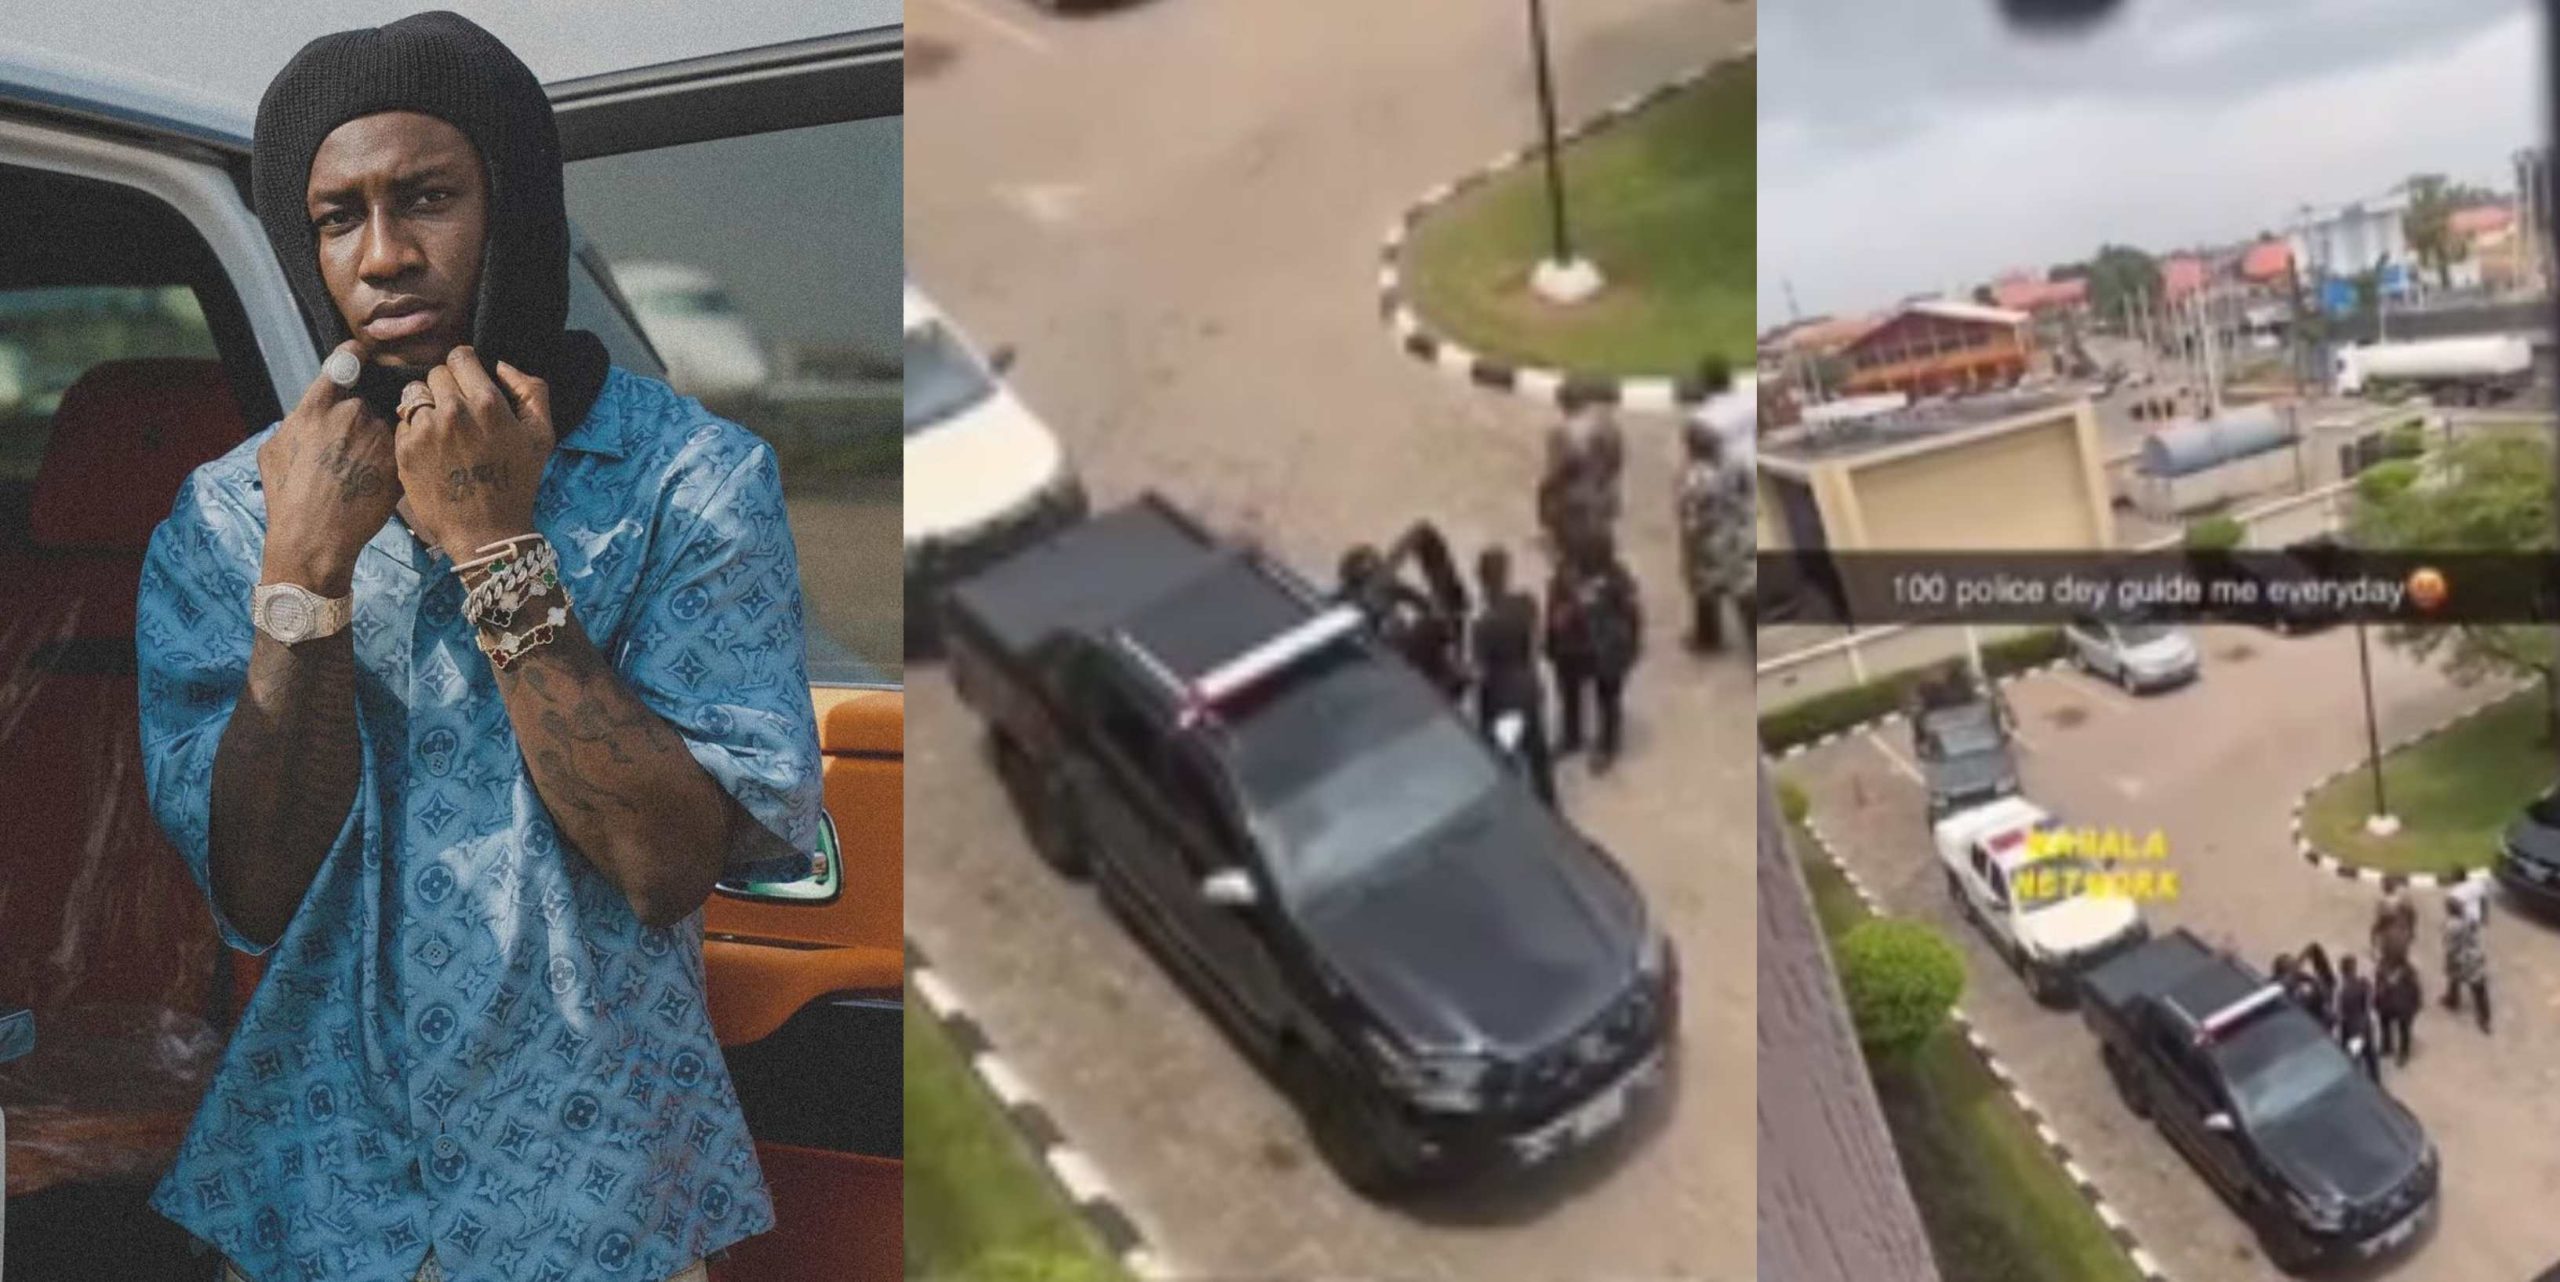 Singer Shallipopi says as he shows off police convoy of vehicles